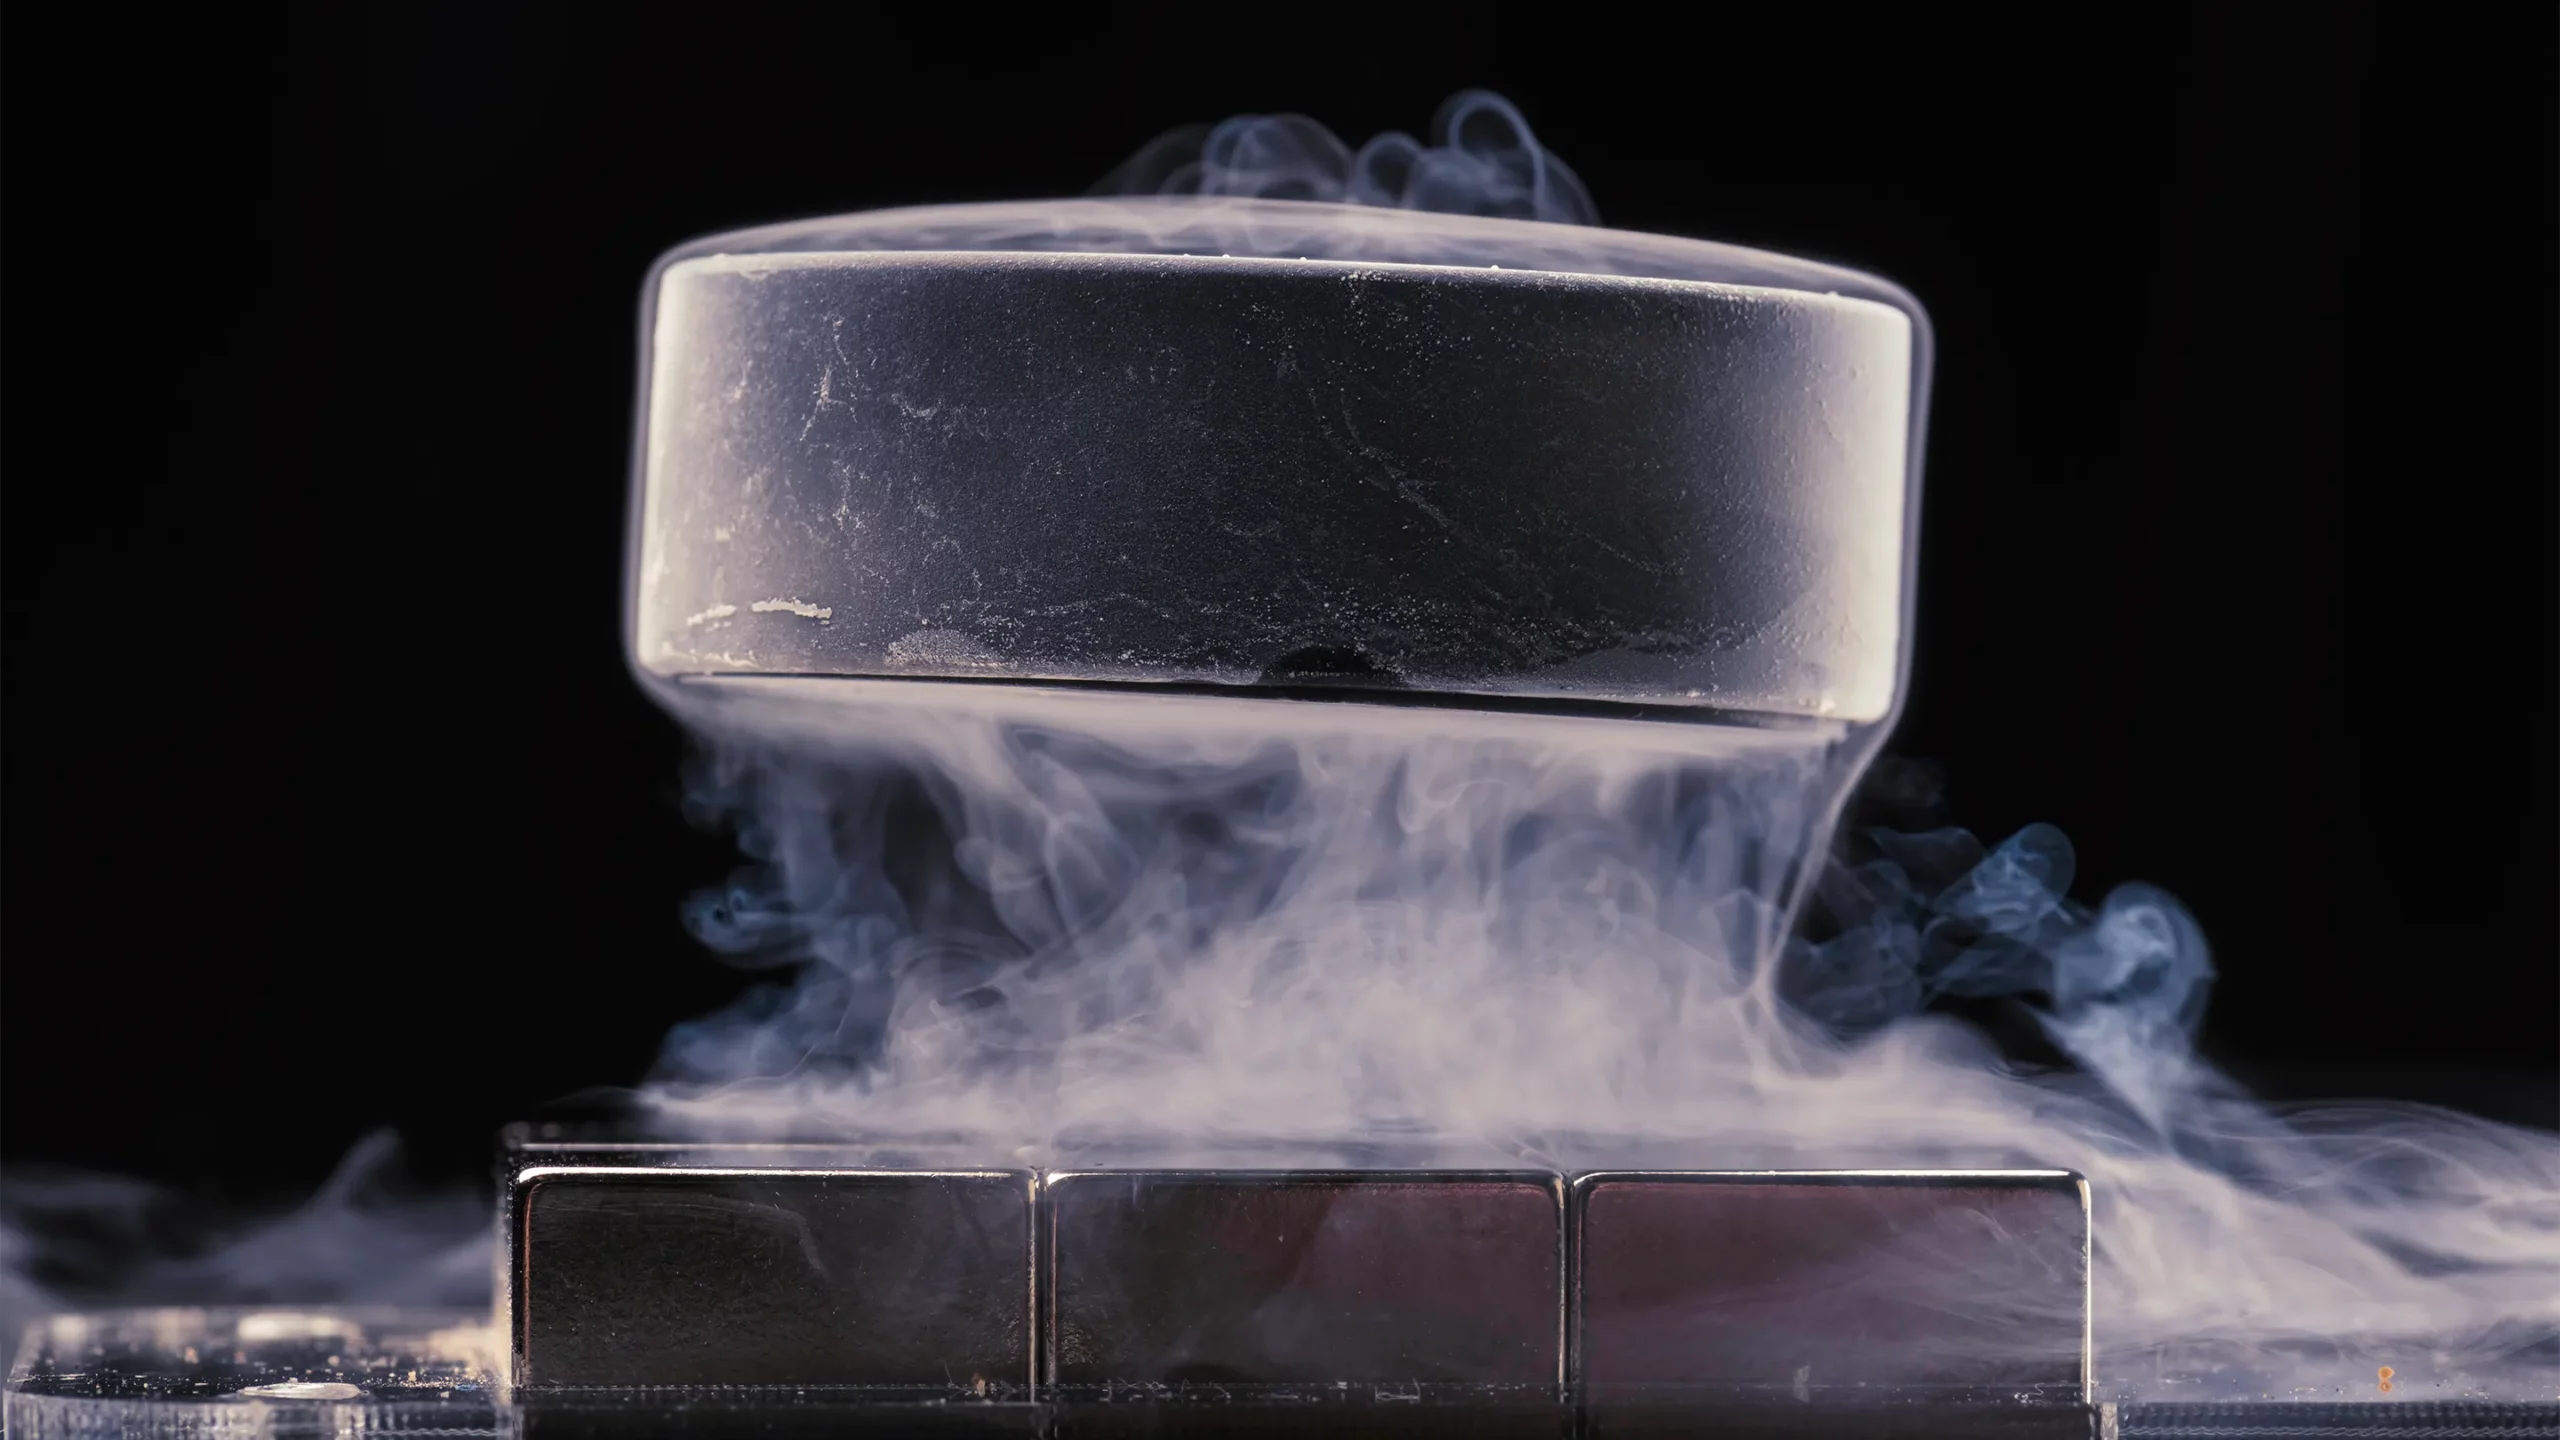 Room-Temperature Superconductor Discovery Meets With Resistance